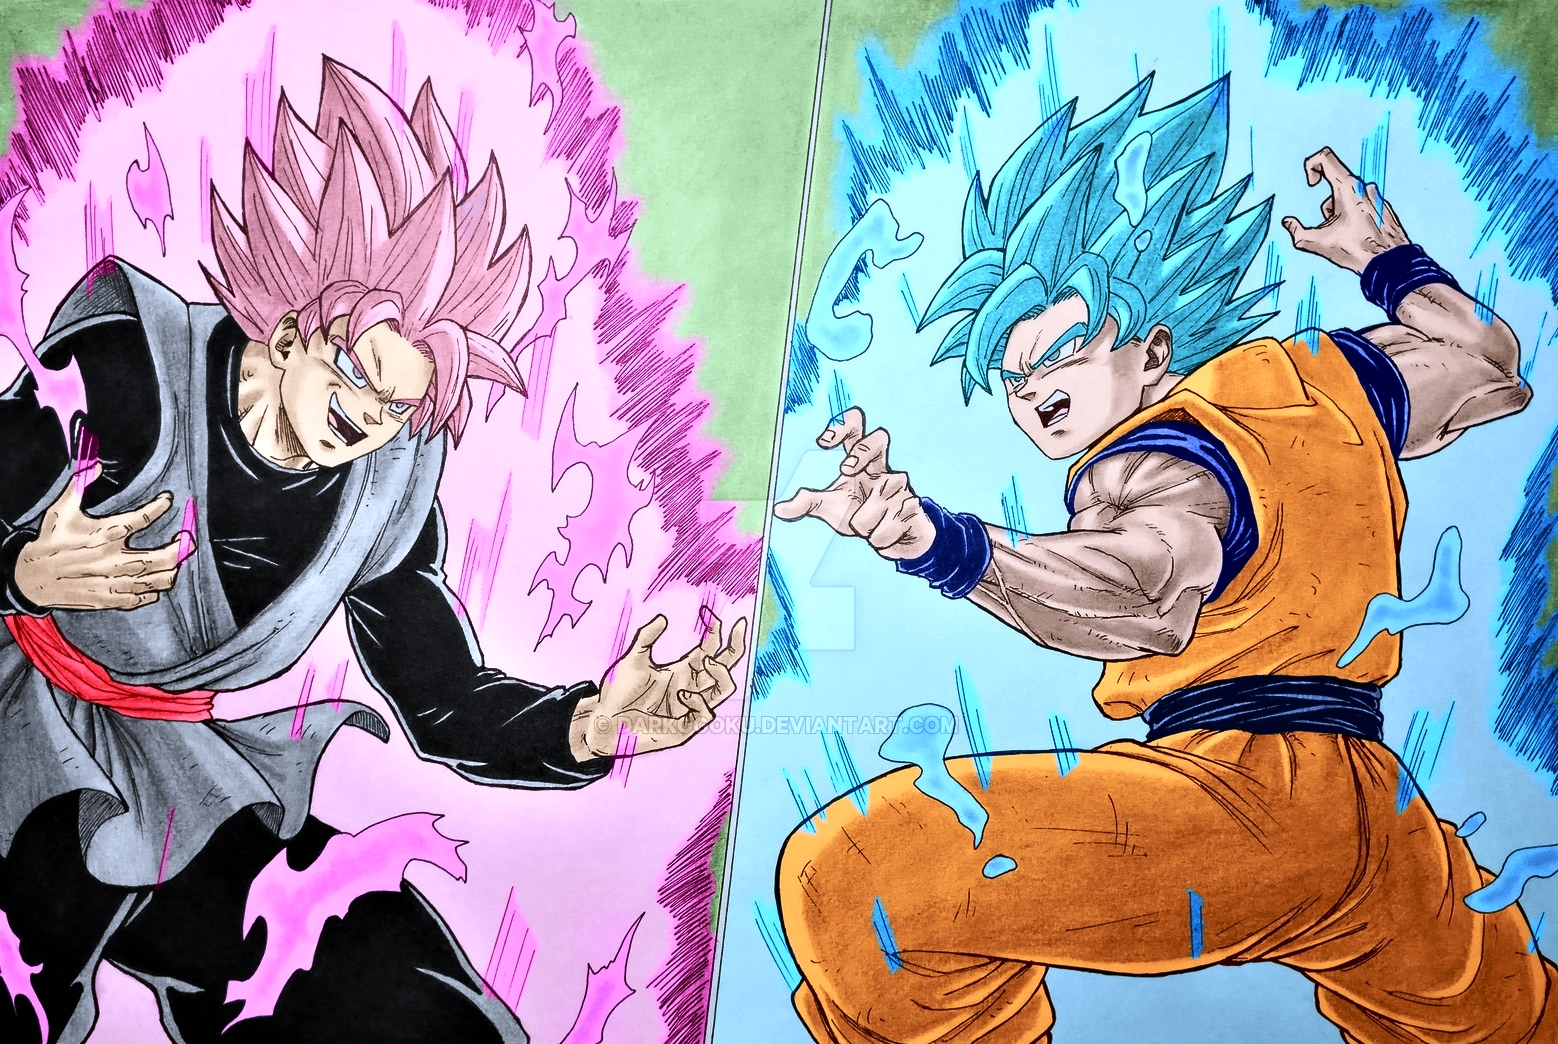 The power of the Super Saiyan Infinity by BlackGokque on DeviantArt